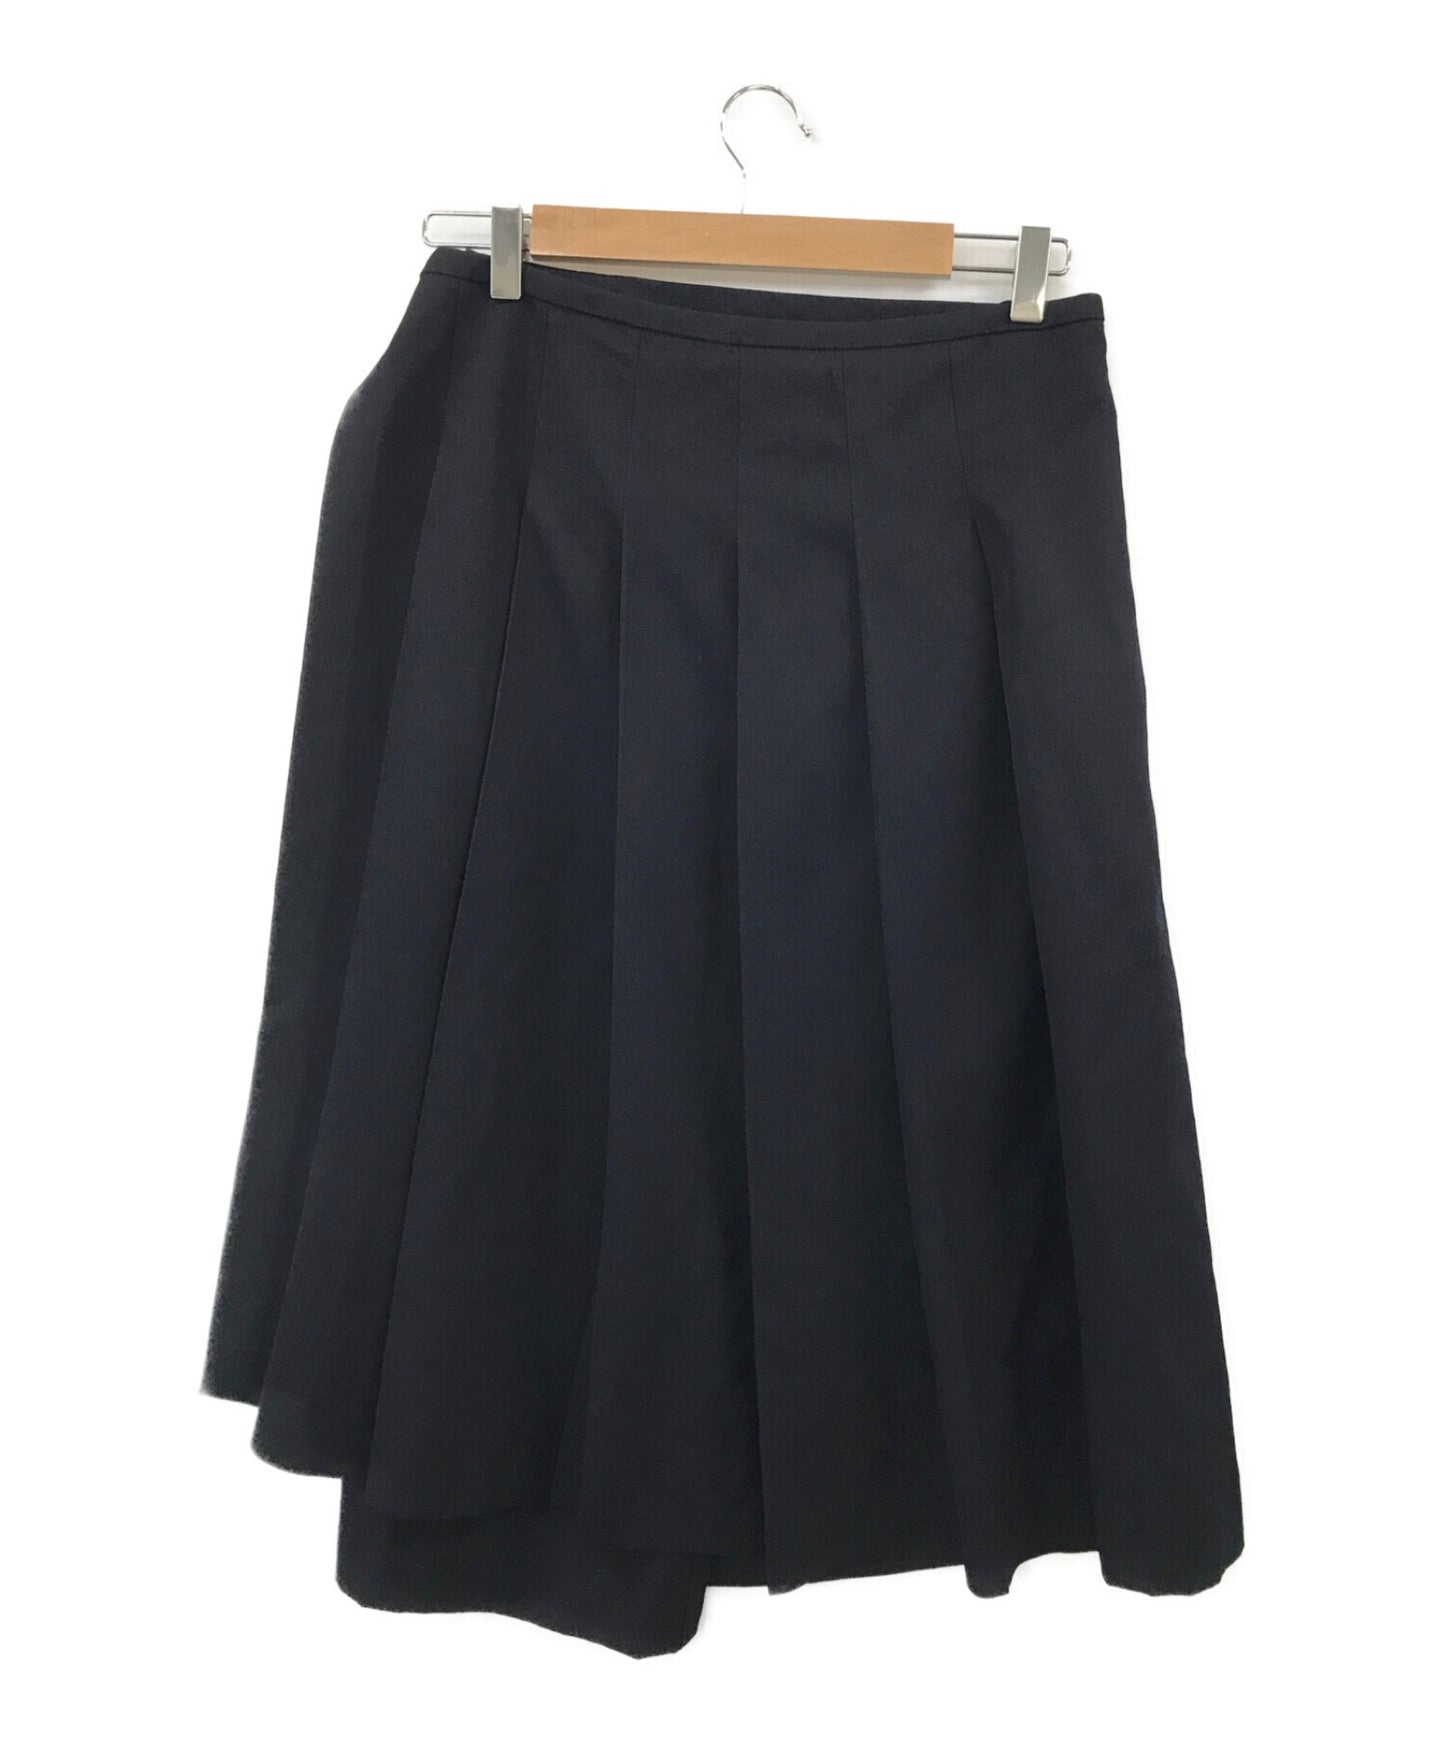 Comme des Garcons Comme des Garcons Back Pleated Wrap Skirt / Flared Skirt RT-S002 / AD2007